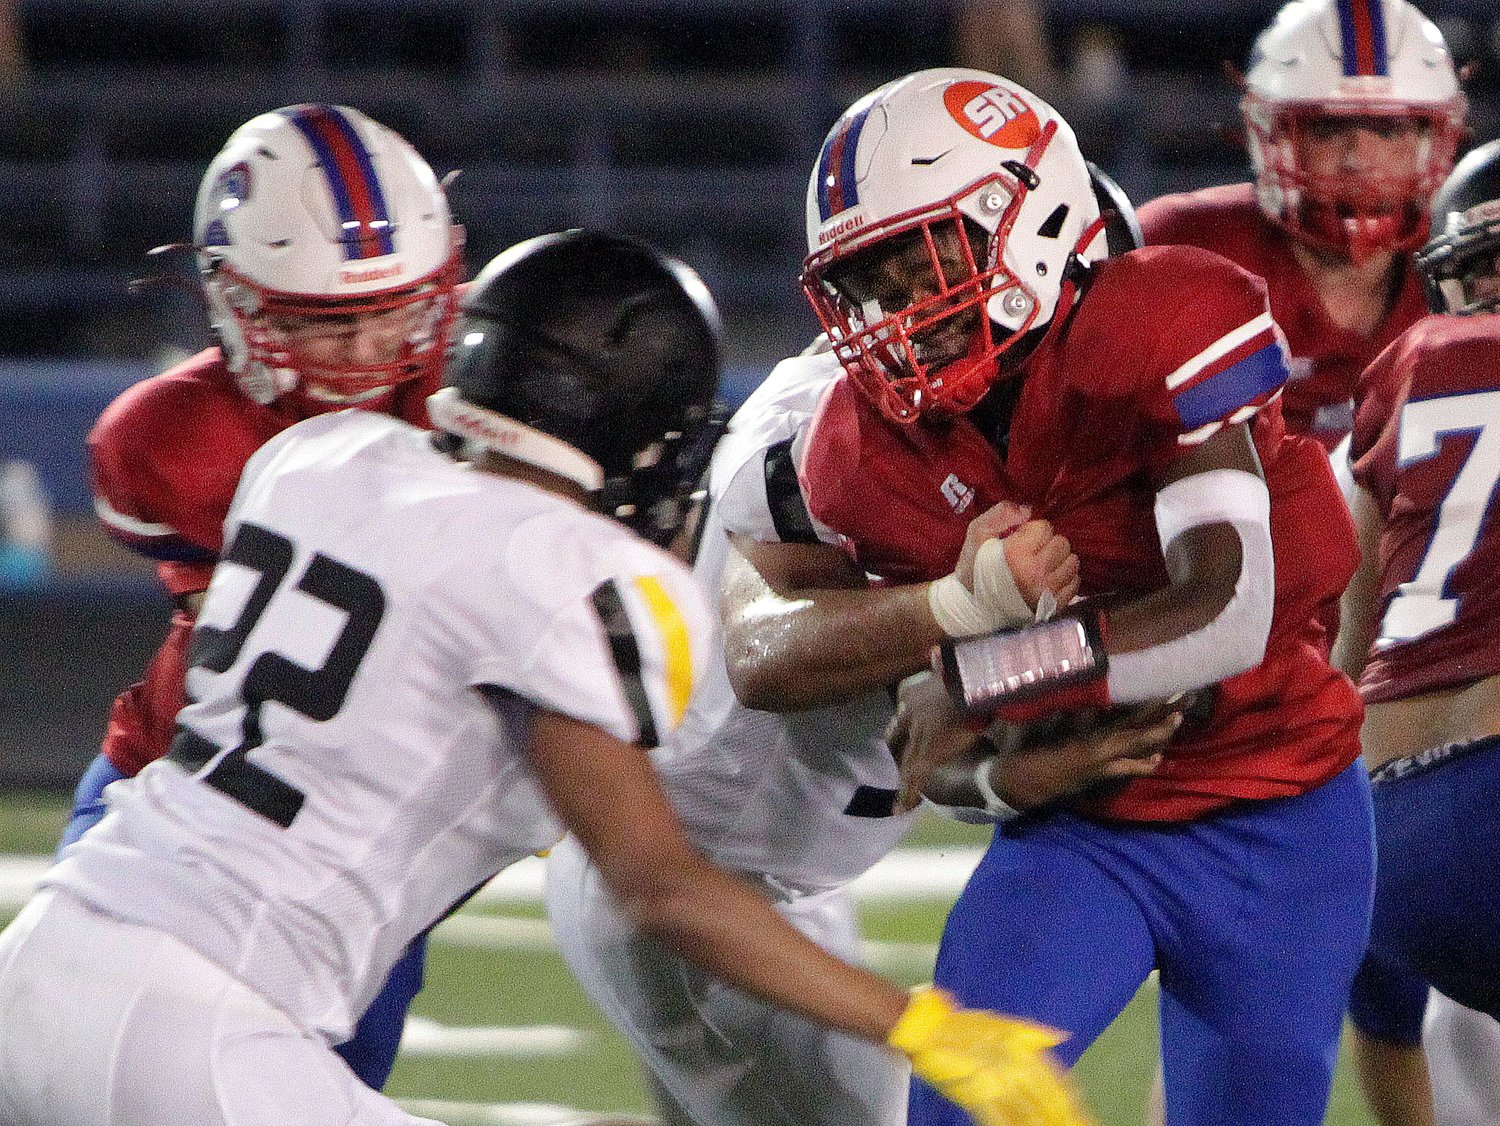 Moberly sophomore running back Chris Alexander was one of many Spartan players making their varsity debut in the 2021 football season opener at home Friday, Aug. 27. Alexander (No. 1) carried the ball seven times for 11 yards during the Spartans 32-12 loss to Smith-Cotton High School of Sedalia.